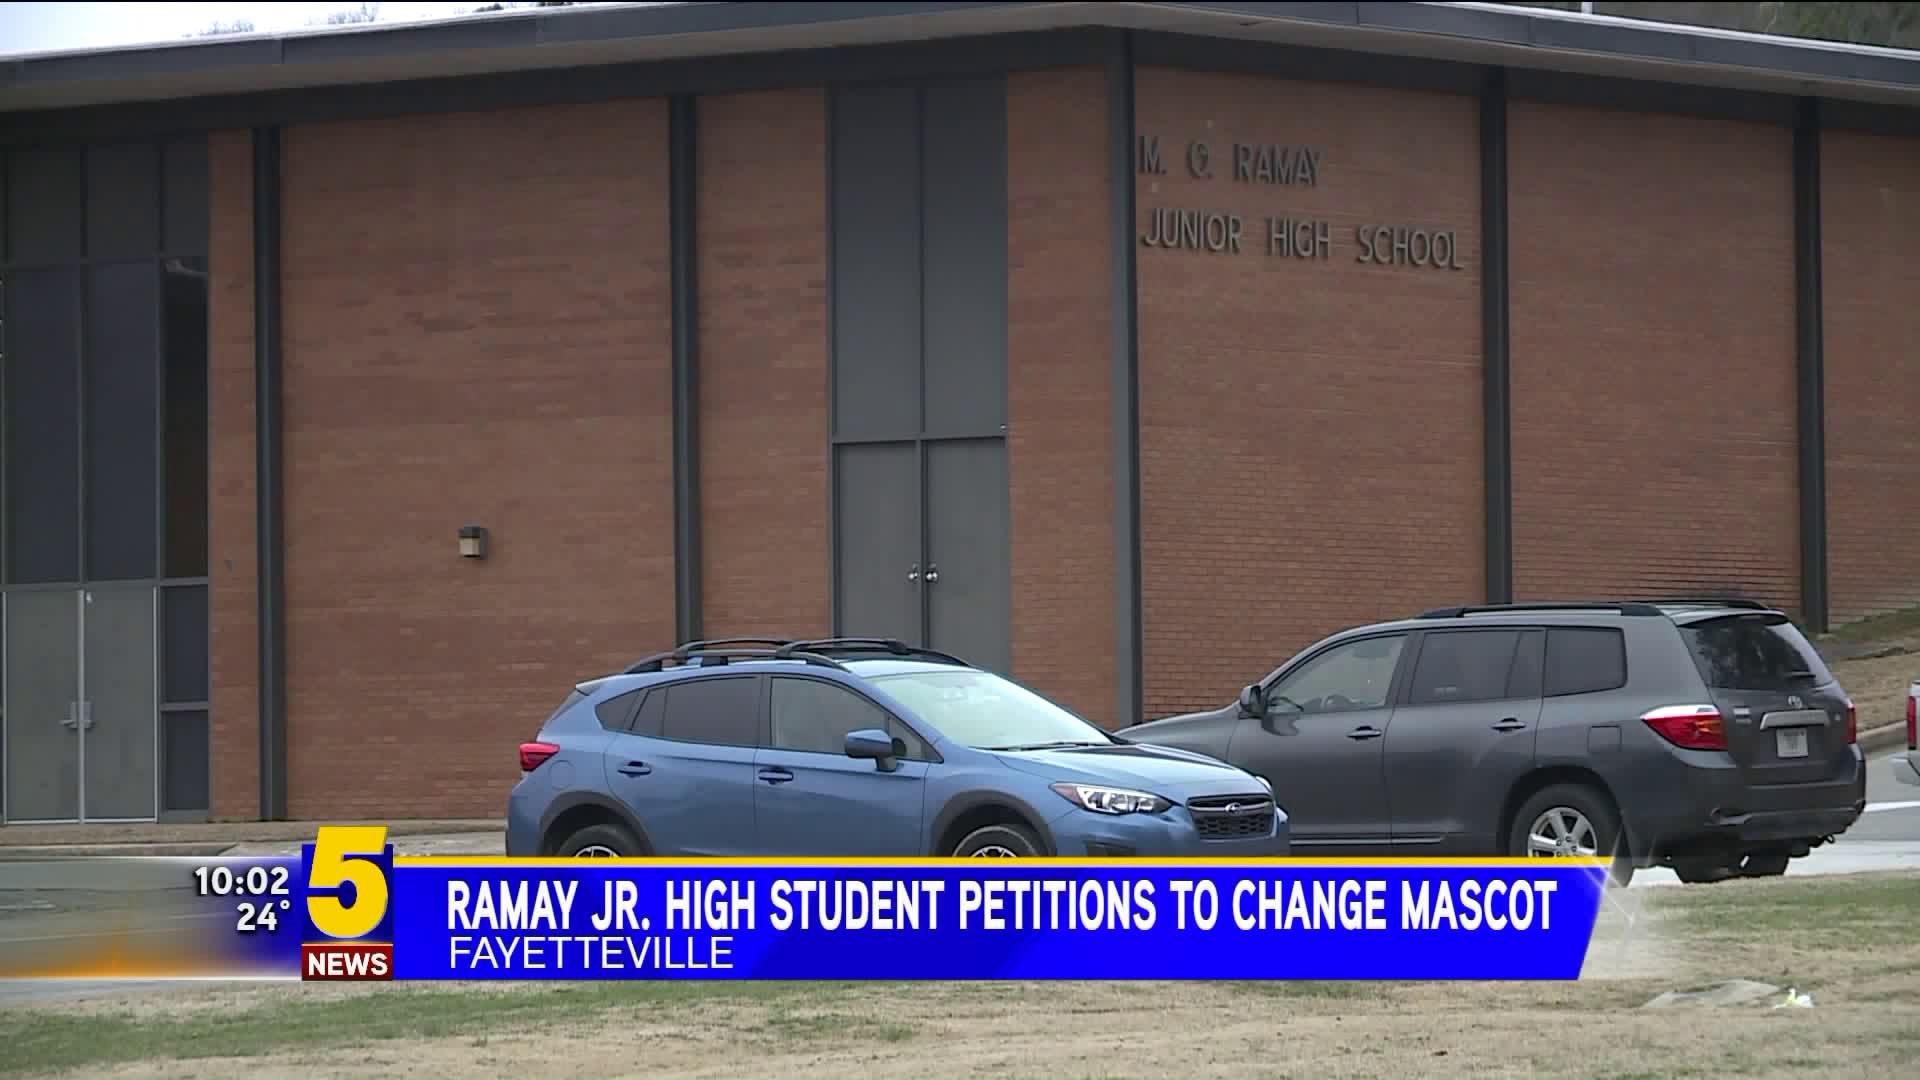 Ramay Jr High Student Petitions To Change Mascot